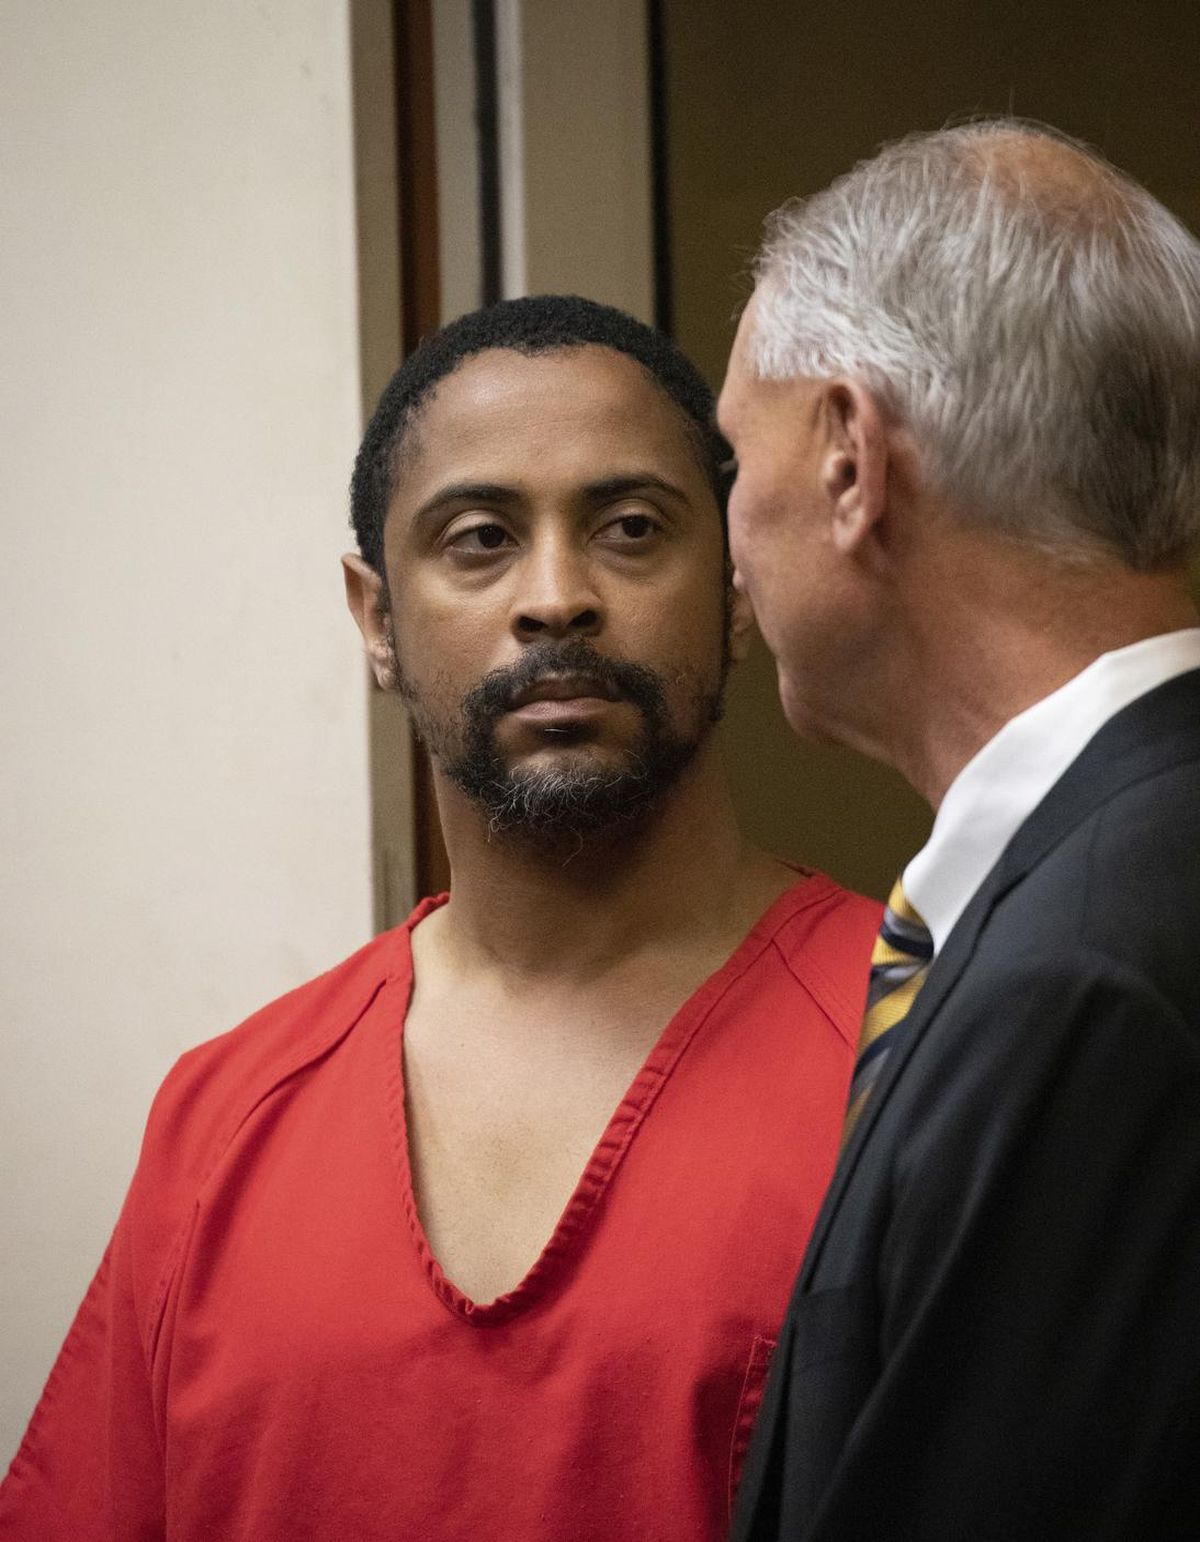 Isaiah J. Peoples appears for his arraignment in Santa Clara County Superior Court as his lawyer, Chuck Smith, stands at his side on Friday, April 26, 2019, in San Jose, Calif. The former U.S. Army sharpshooter Peoples is charged with eight counts of attempted murder after authorities say he deliberately plowed his car into pedestrians Tuesday. (Jim Gensheimer / Associated Press)